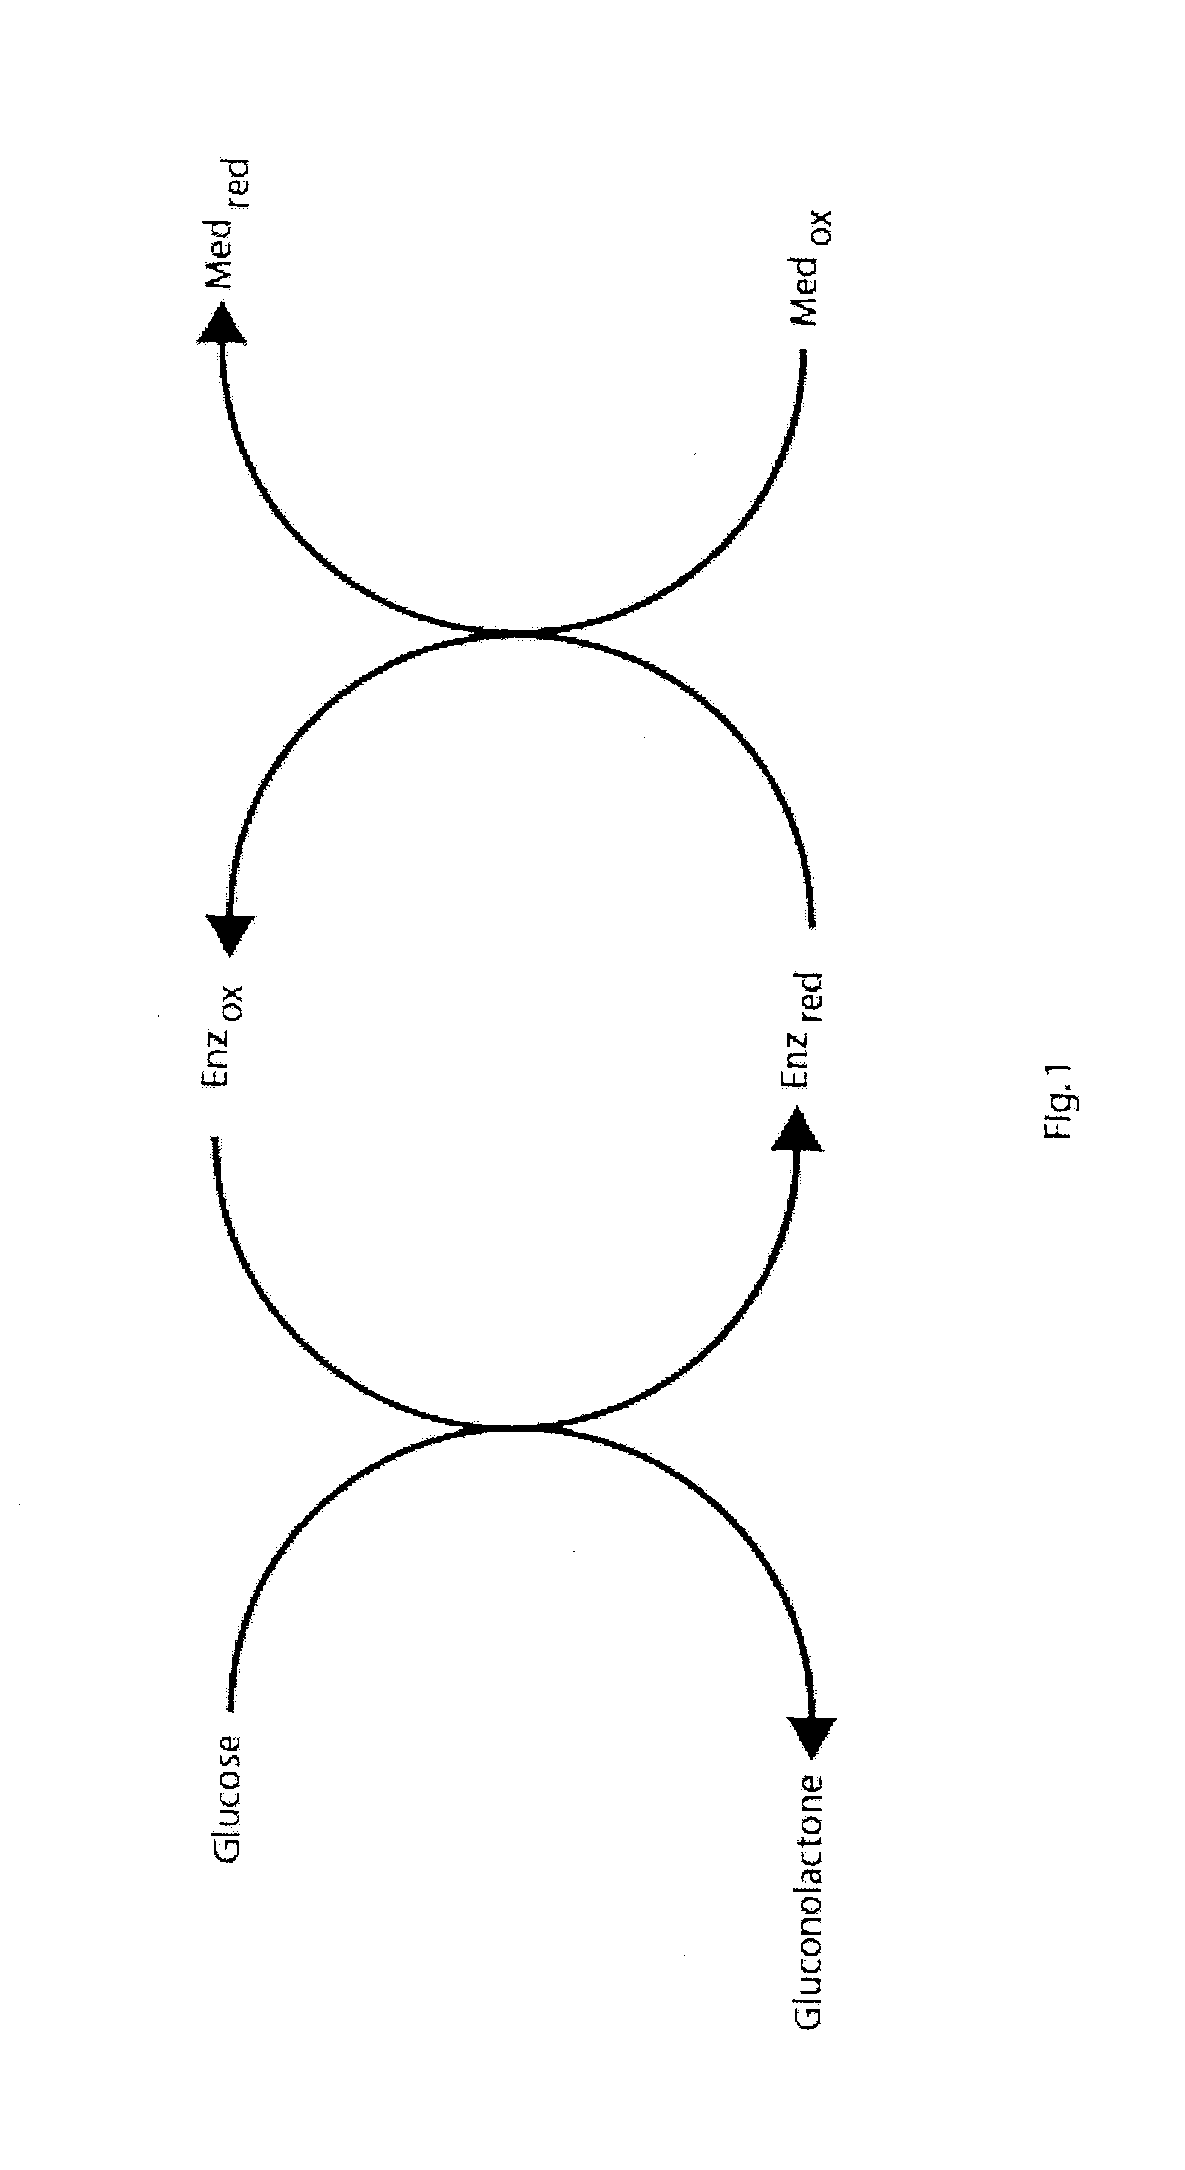 Method for Determination of Analyte Concentrations and Related Apparatus